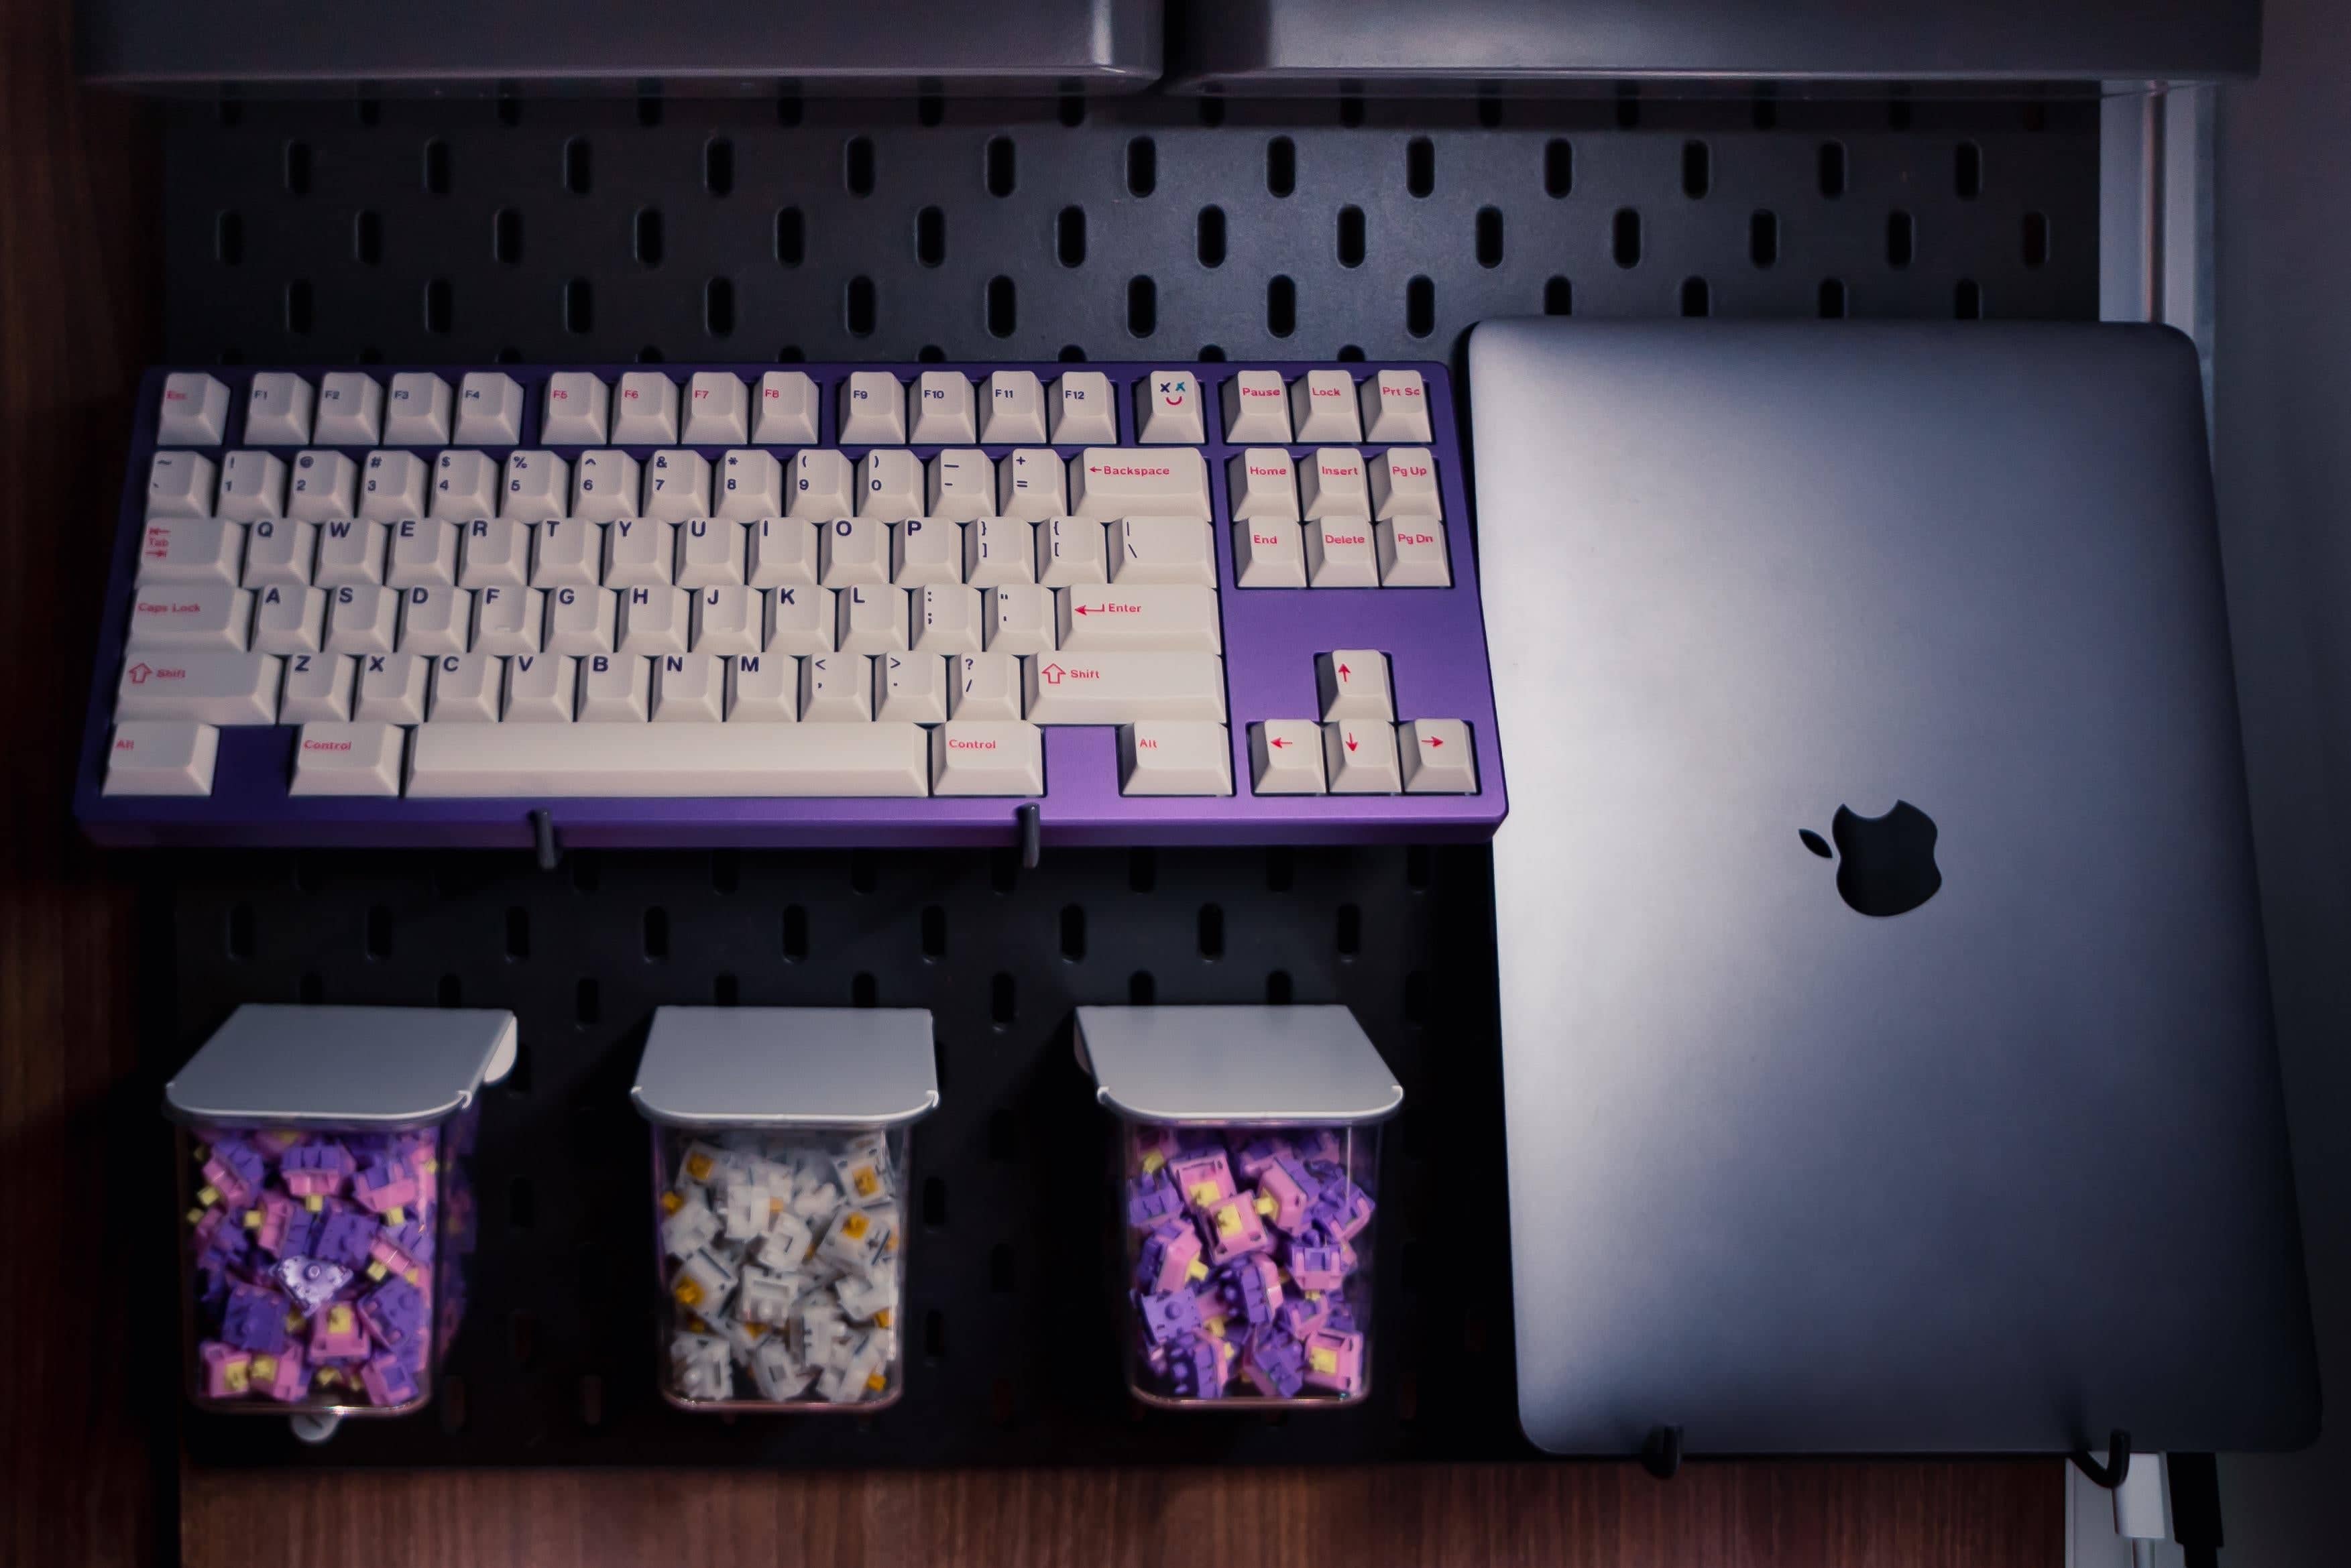 A pegboard, a few hooks and you've got a whole backup mechanical keyboard situation. Not to mention the MacBook Pro.